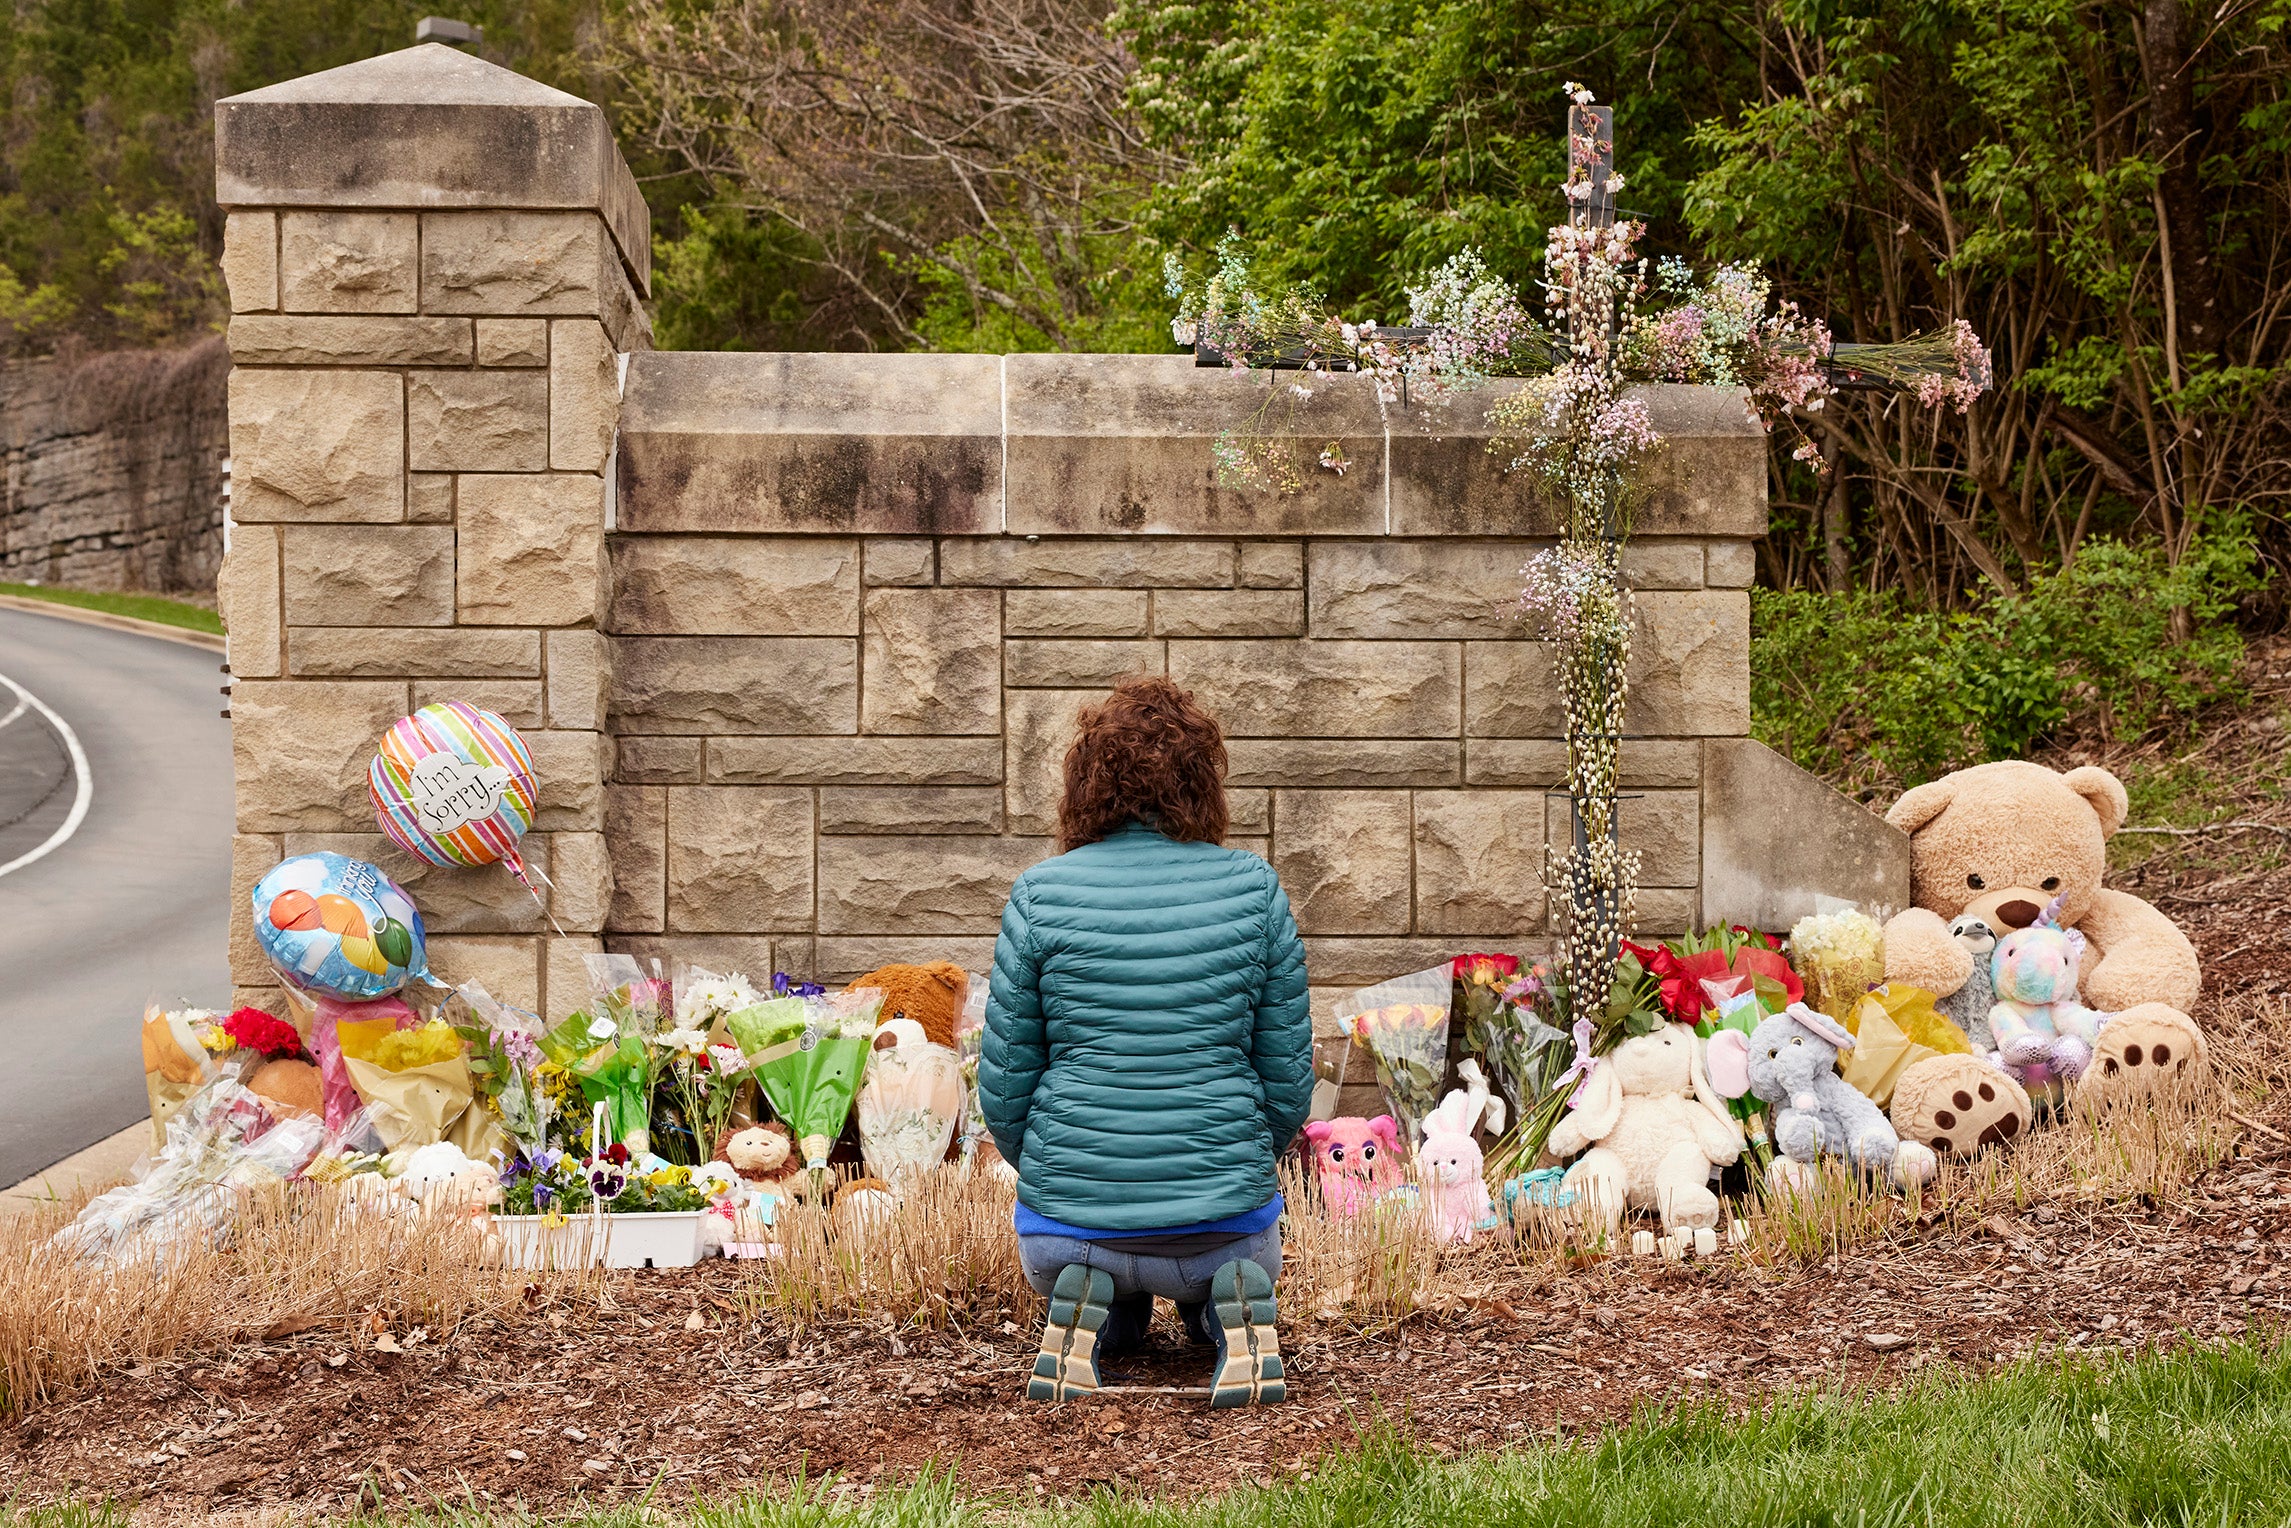 A woman in a teal jacket with brown hair kneels at a makeshift memorial of flowers and toys placed in front of a stone wall.